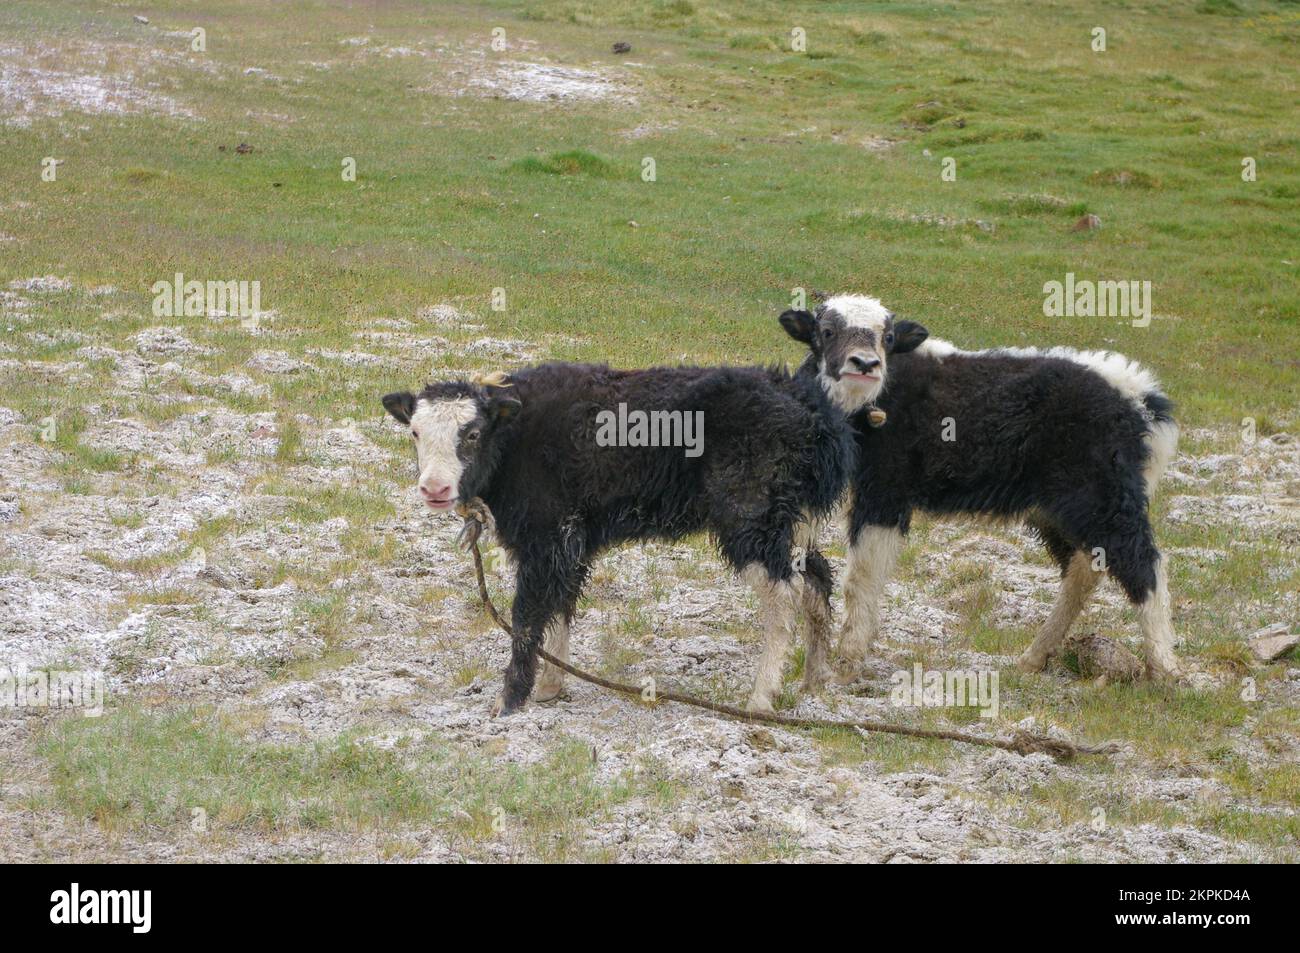 View of cute young black and white yak calves in green pasture along the high-altitude Pamir Highway in Murghab district, Gorno-Badakshan, Tajikistan Stock Photo